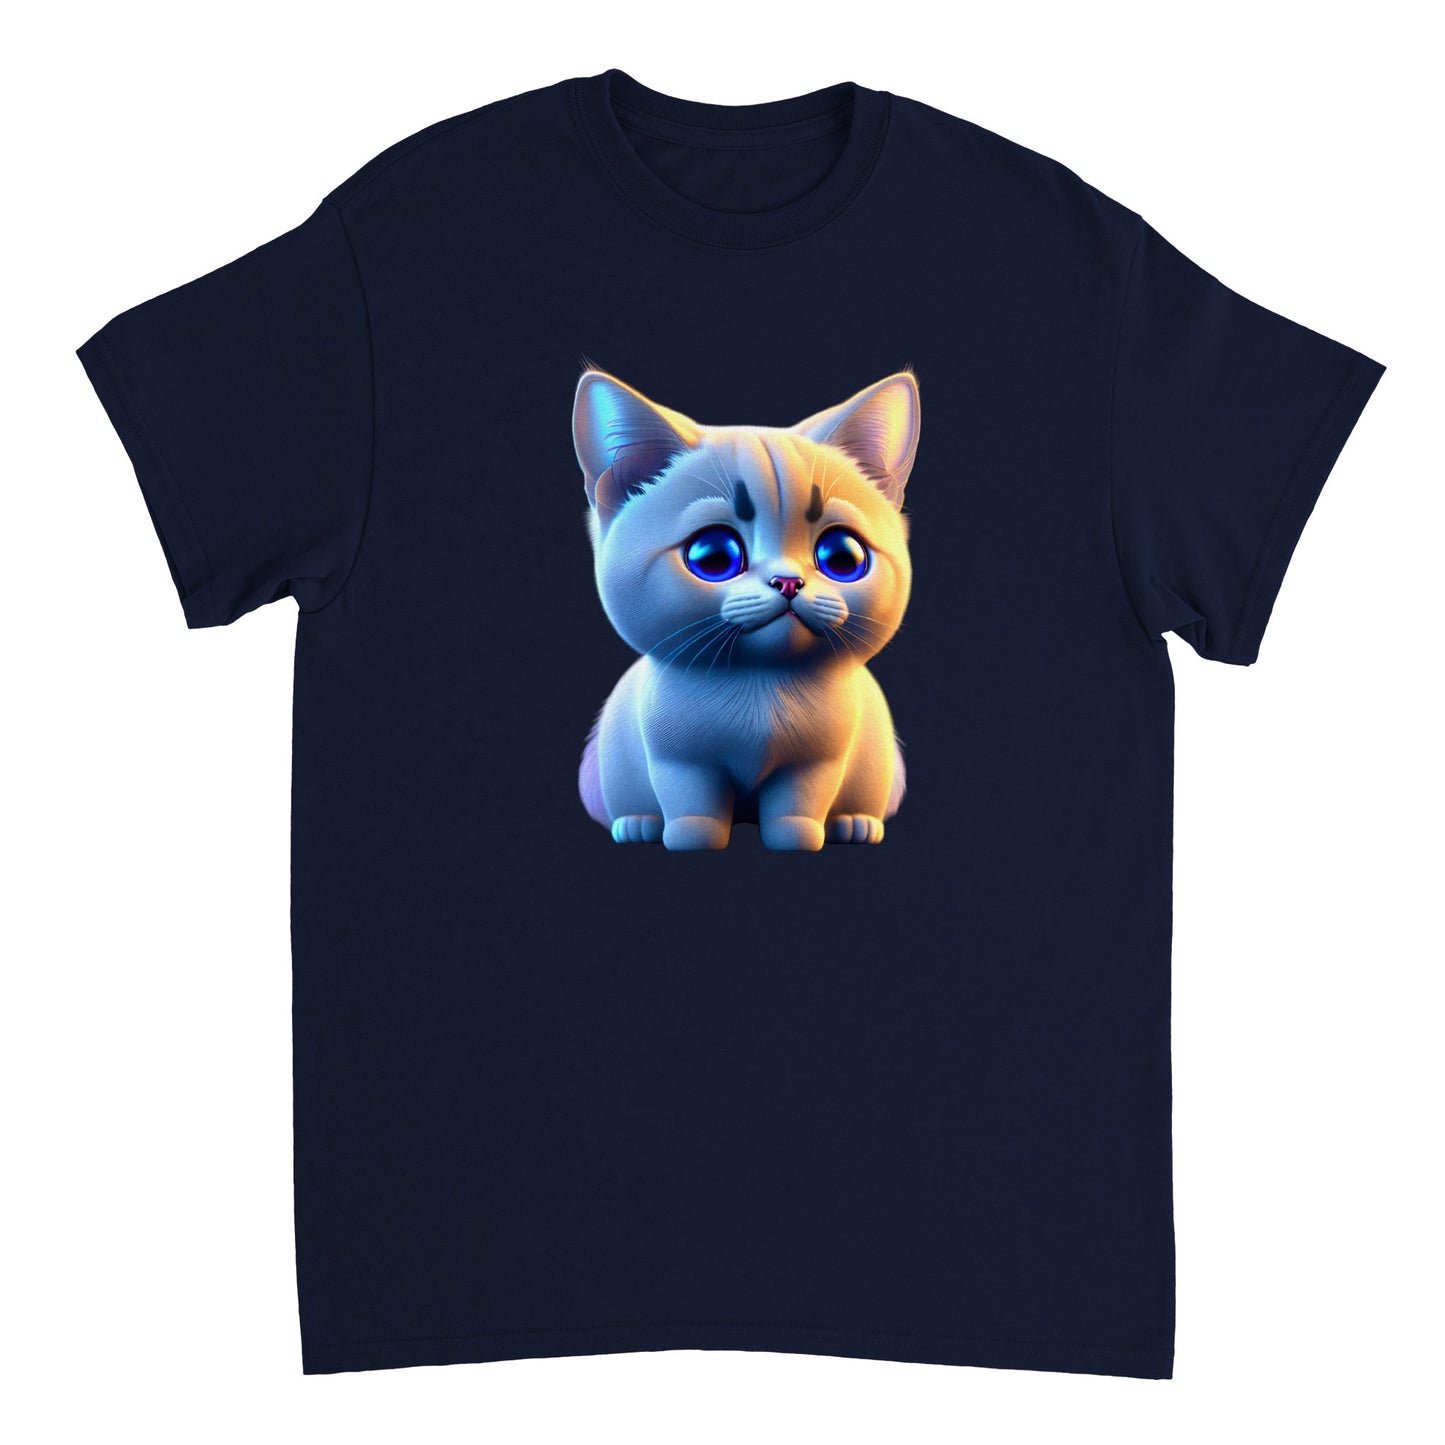 Adorable, Cool, Cute Cats and Kittens Toy - Heavyweight Unisex Crewneck T-shirt 19